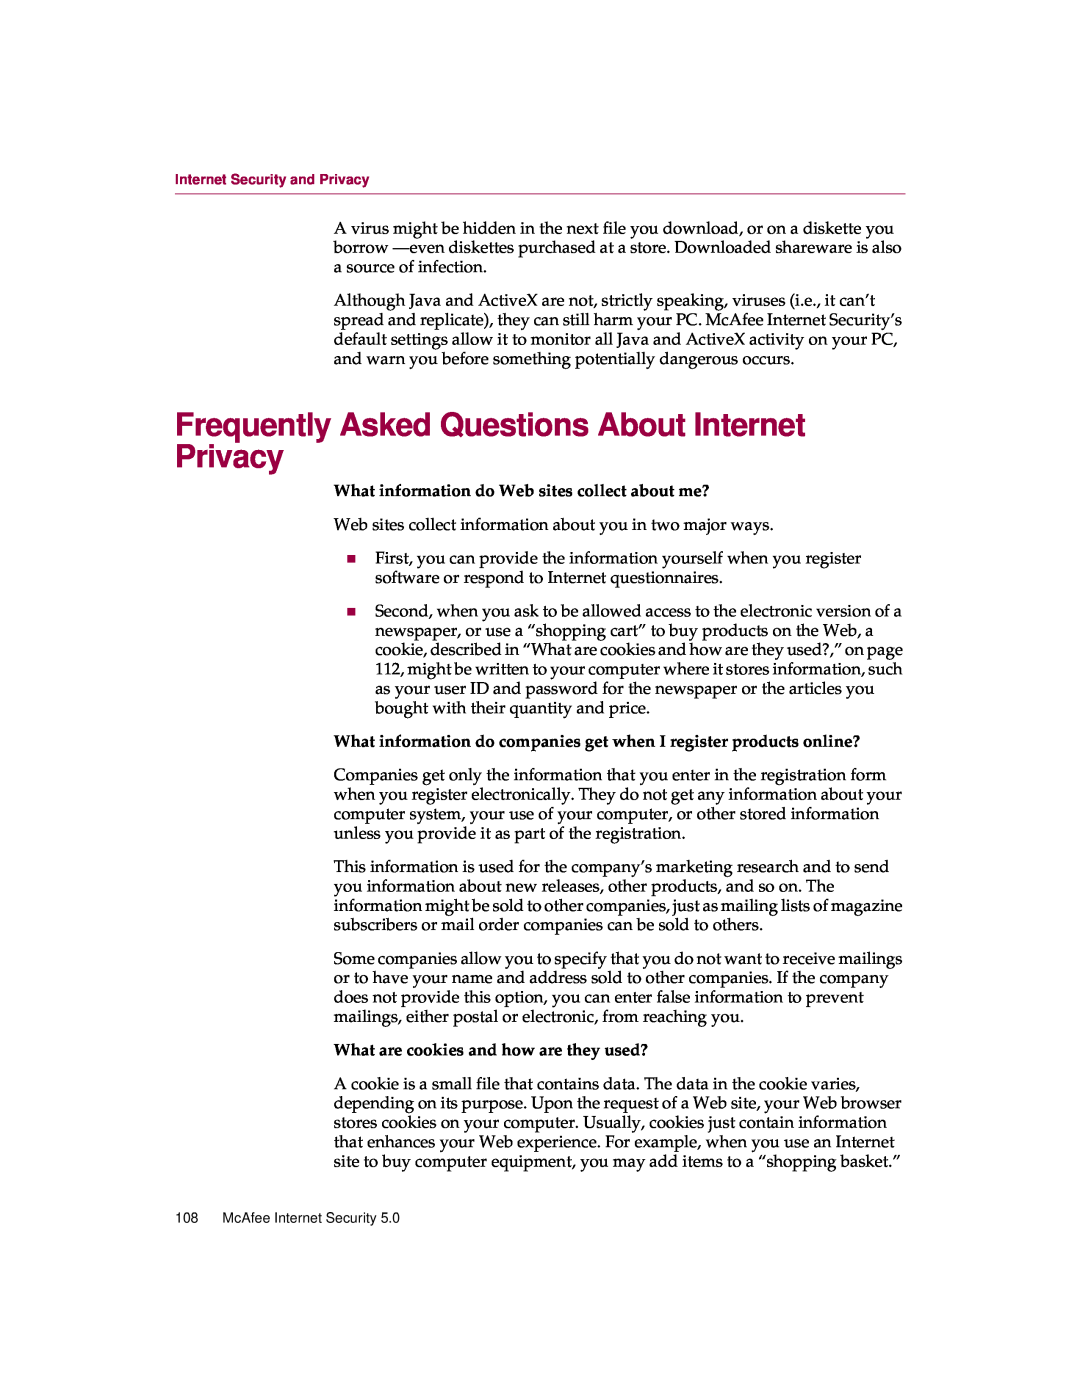 McAfee 5 manual Frequently Asked Questions About Internet Privacy, What information do Web sites collect about me? 